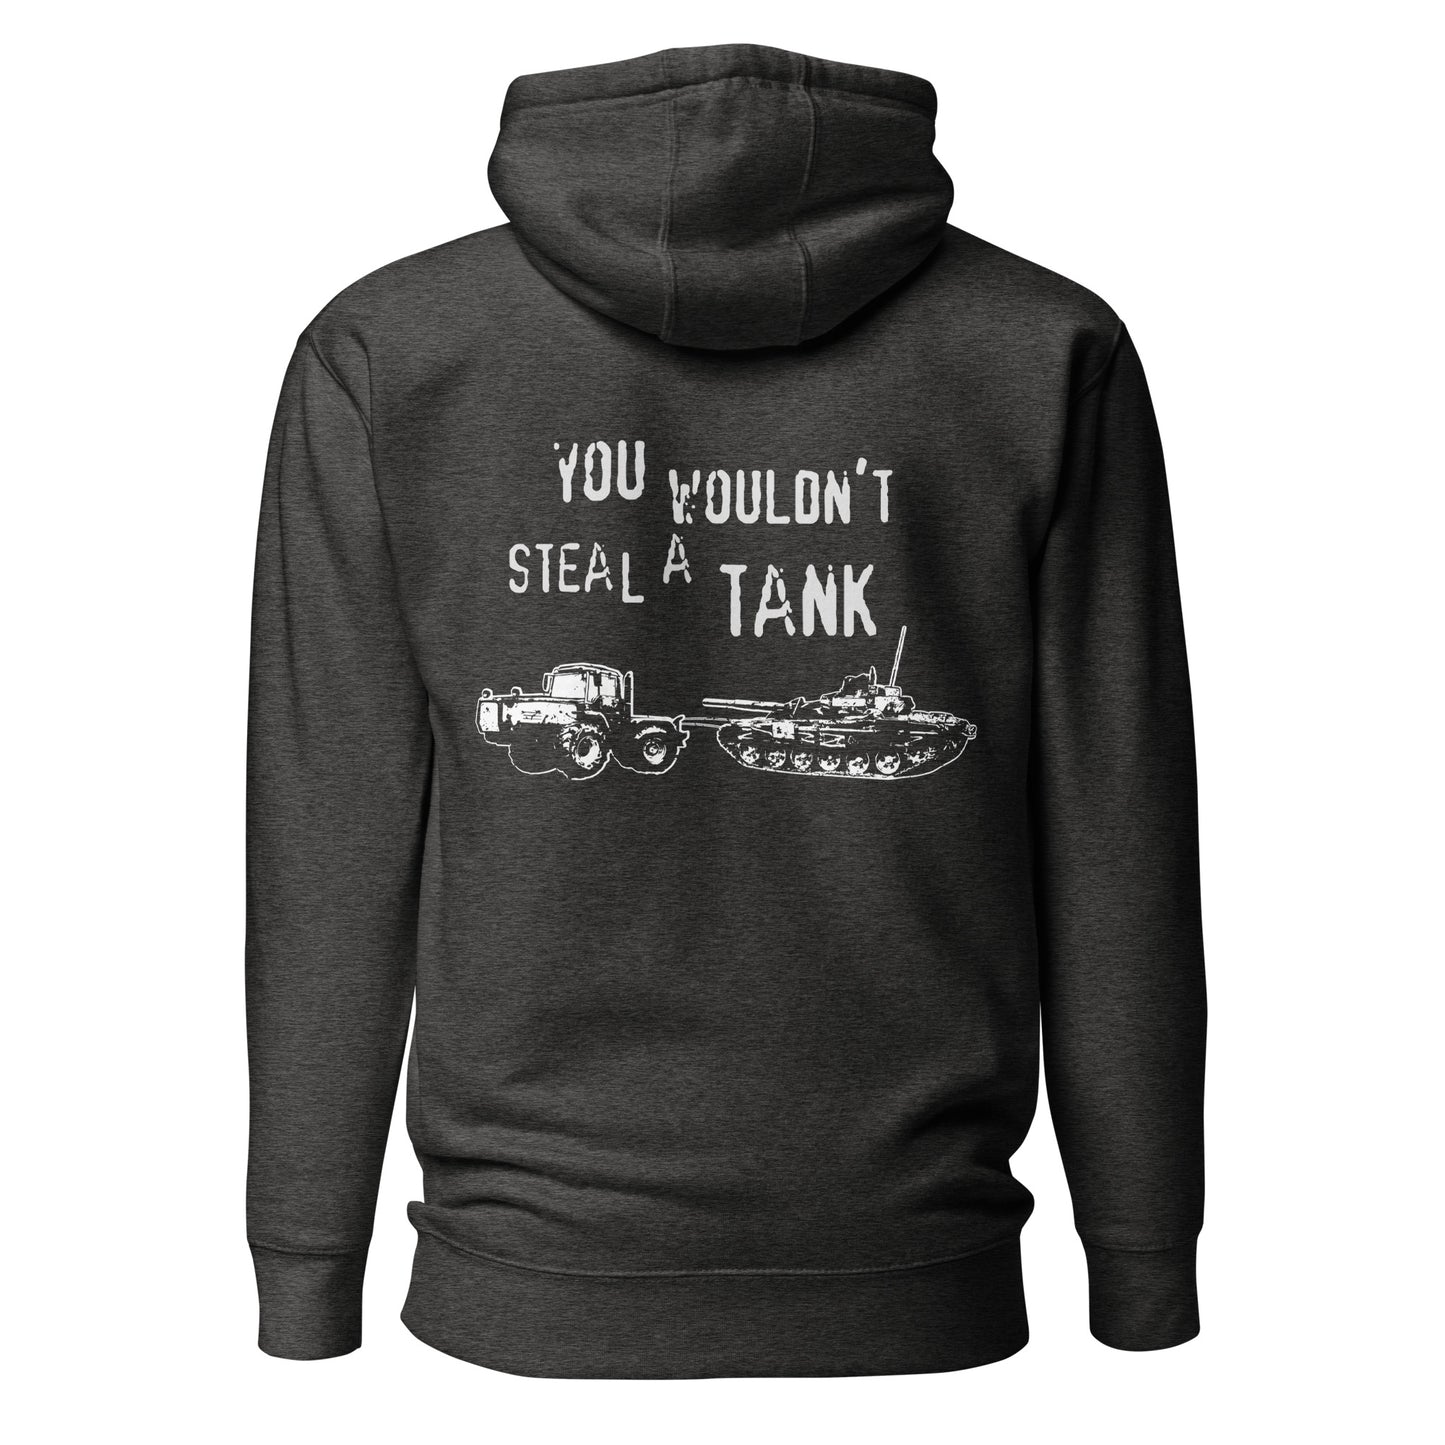 You Wouldn't Steal a Tank Hoodie